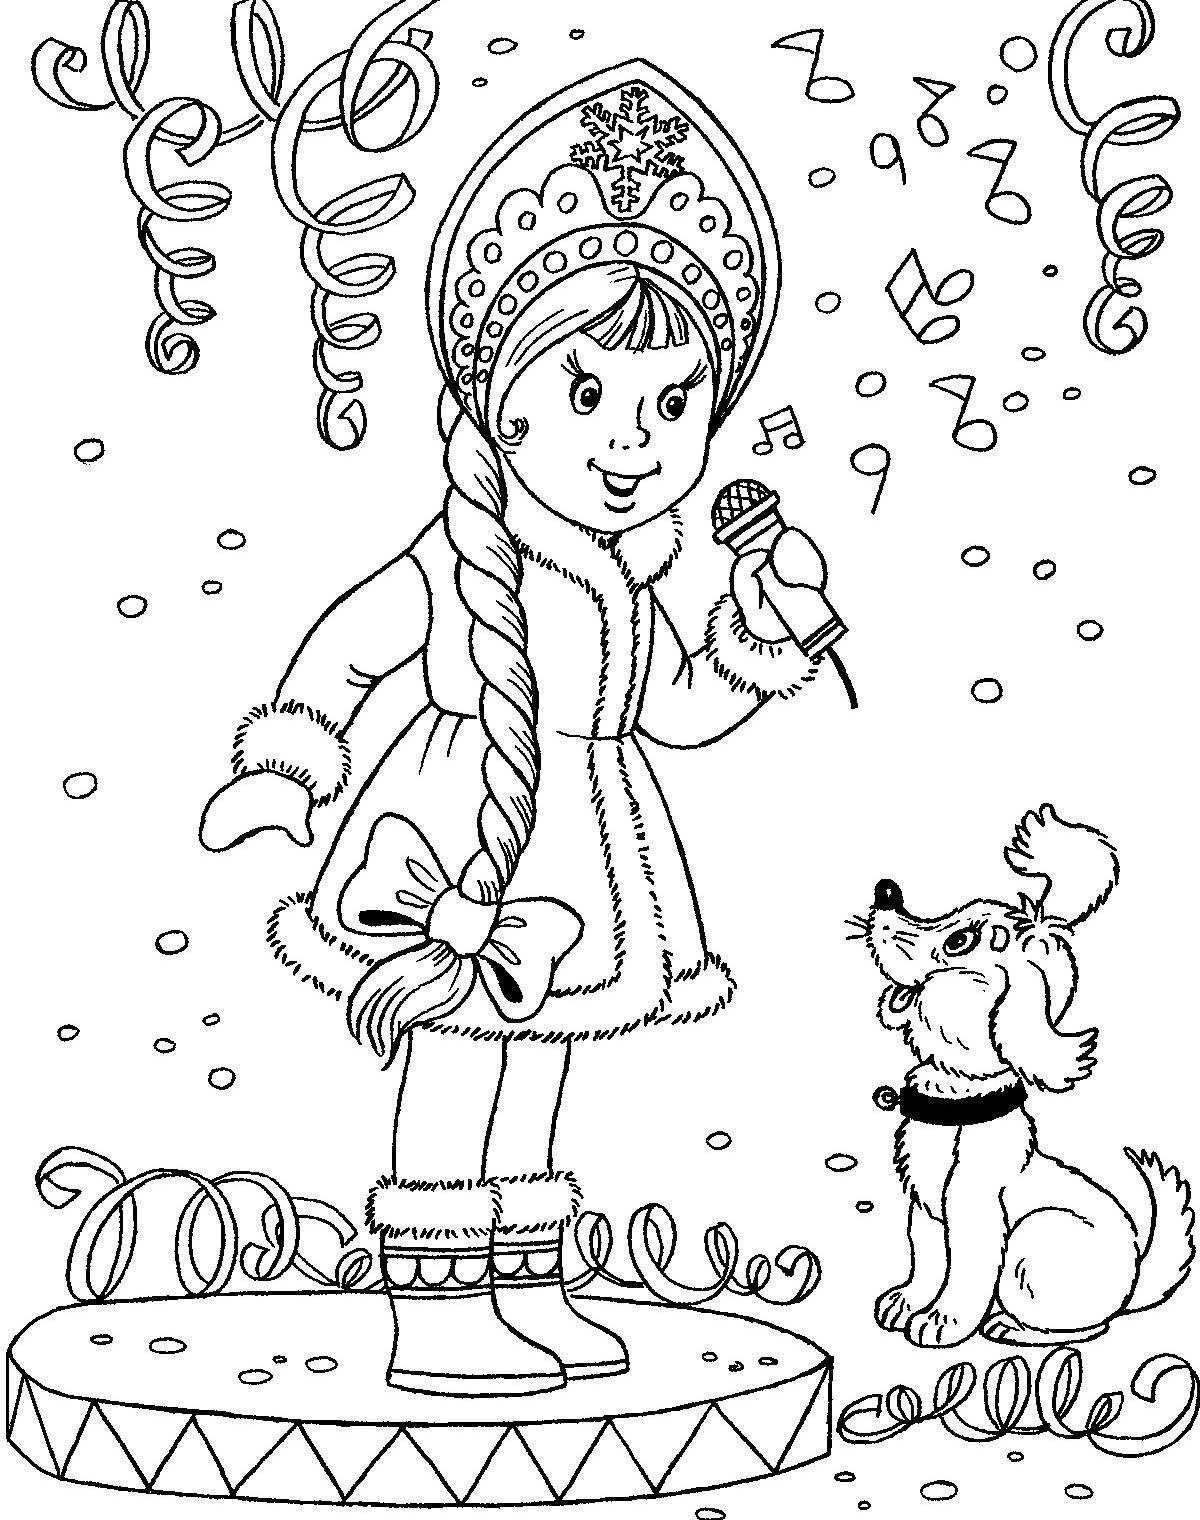 Coloring Maiden and puppy. Category the tale of Snegurochka. Tags:  maiden, puppy, microphone.